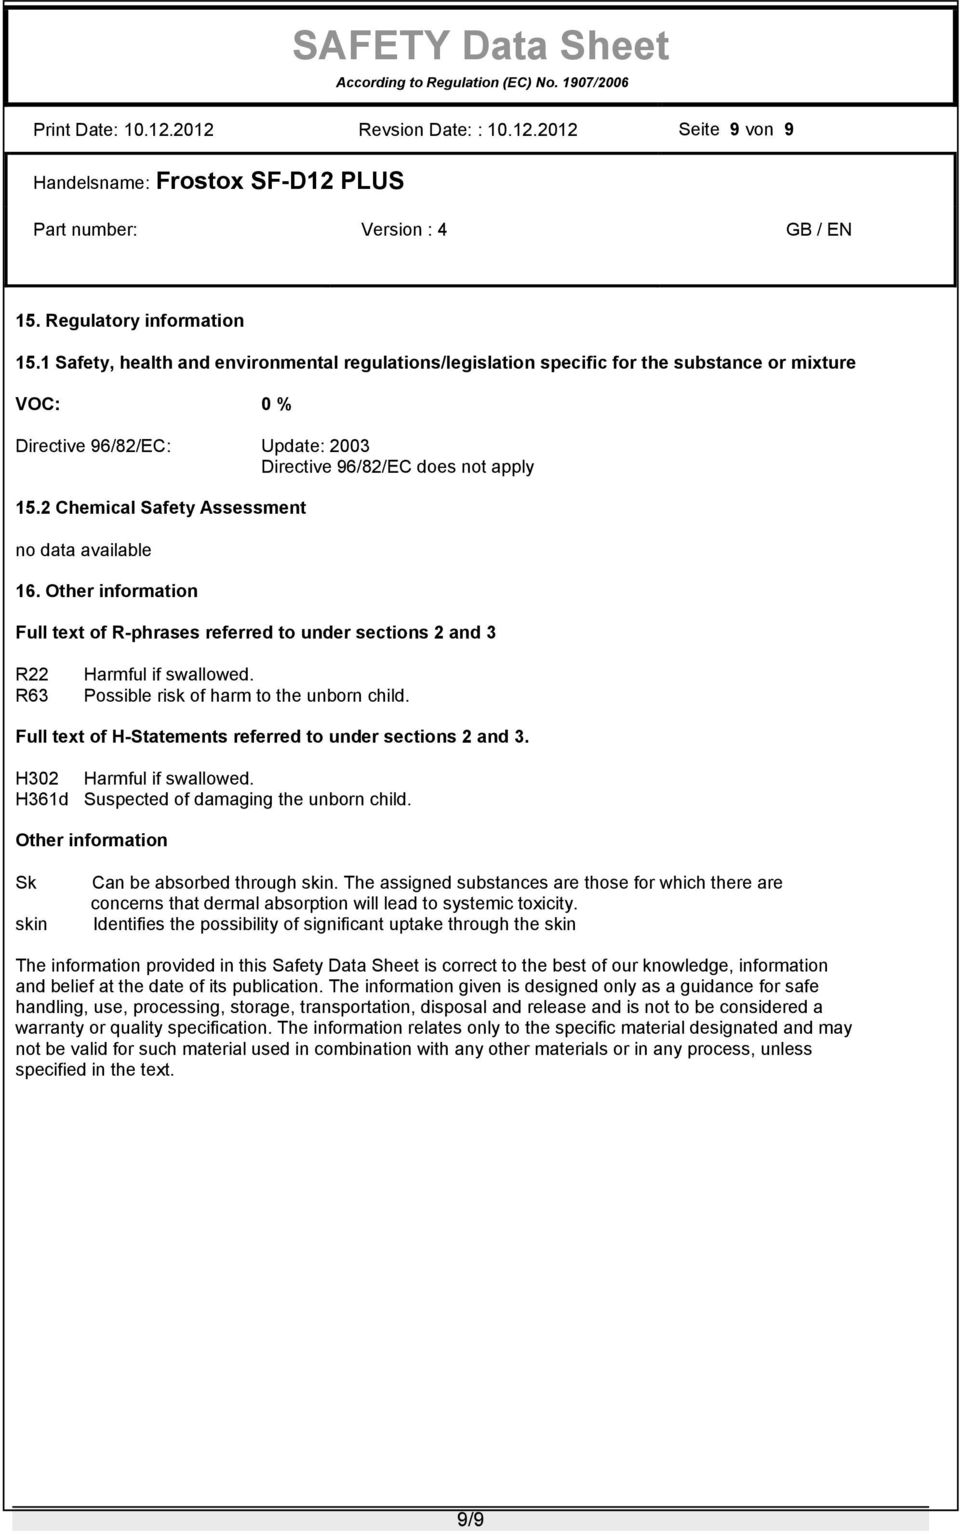 2 Chemical Safety Assessment 16. Other information Full text of R-phrases referred to under sections 2 and 3 R22 R63 Harmful if swallowed. Possible risk of harm to the unborn child.